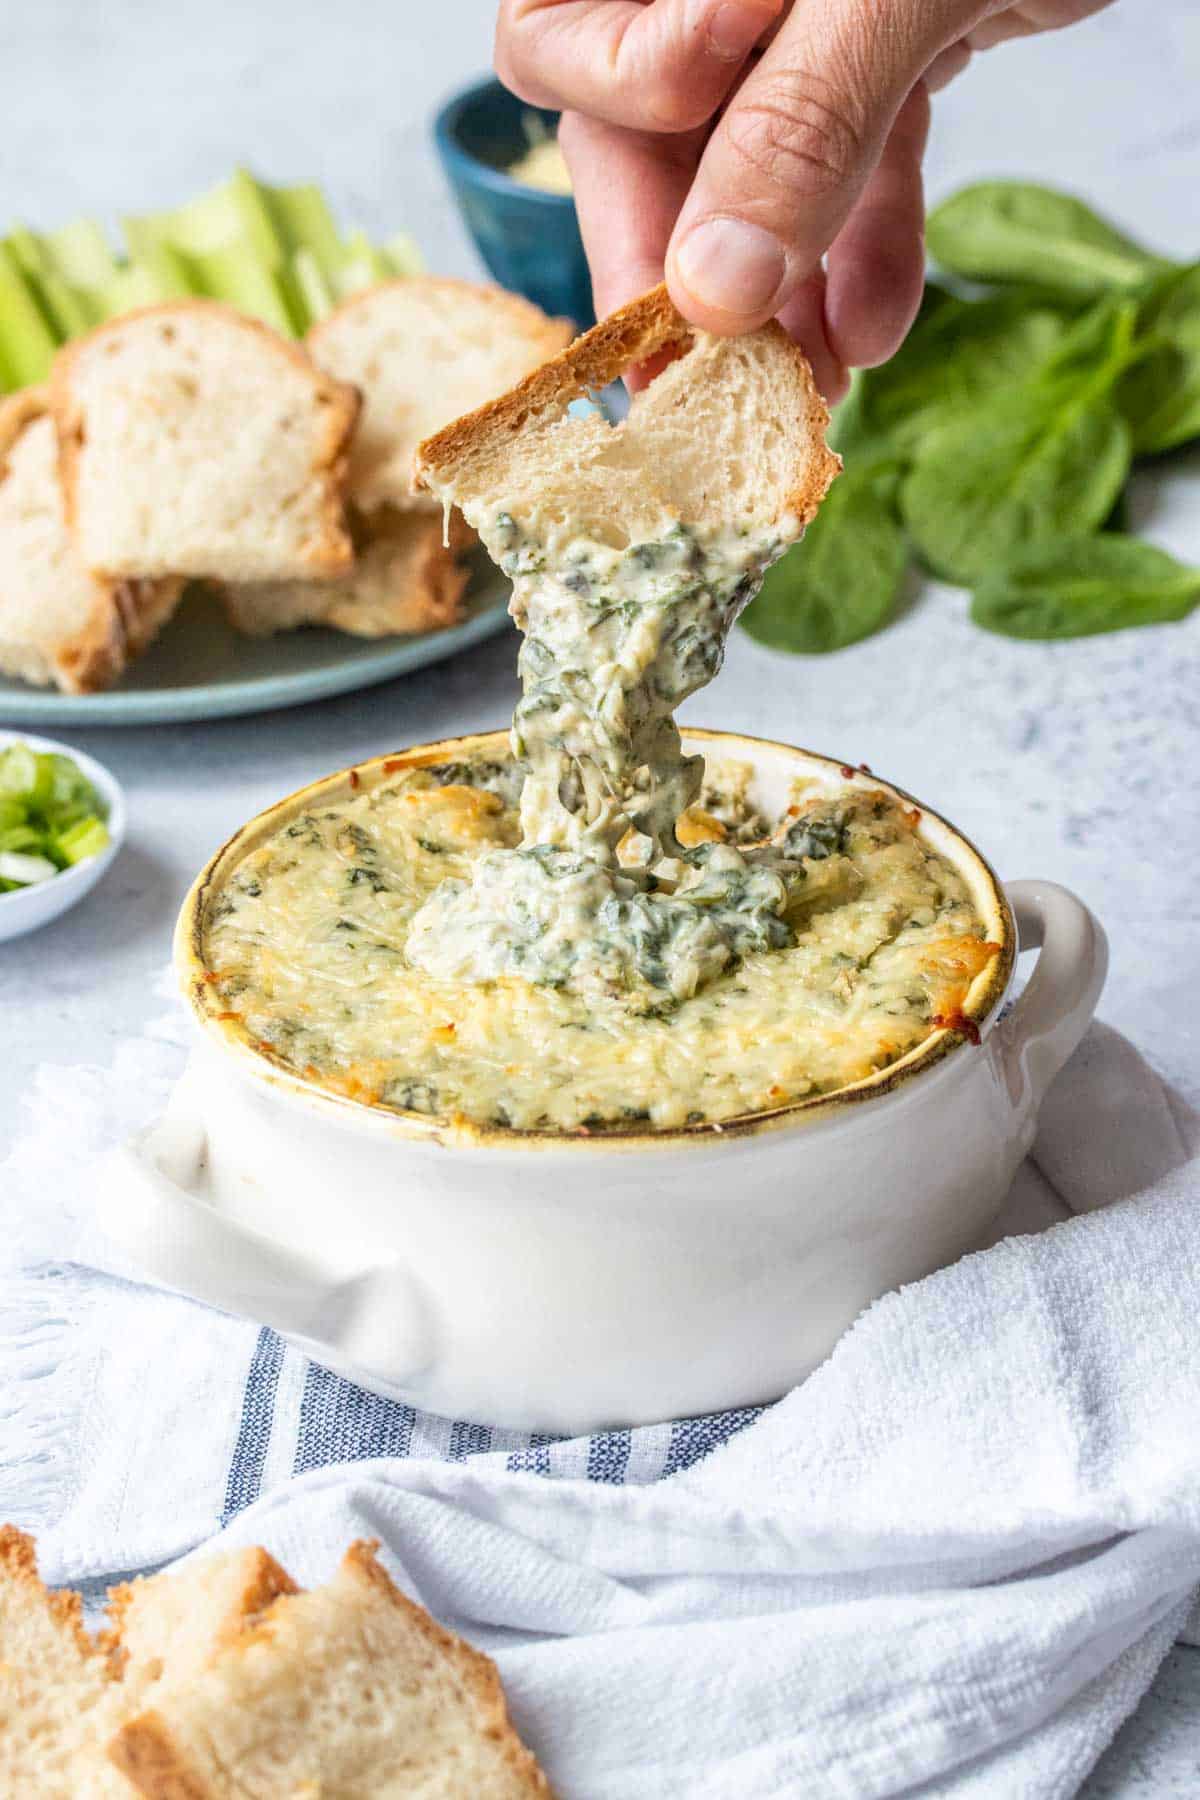 A hand dipping a toasted piece of bread into a white bowl filled with baked creamy spinach dip on a white towel